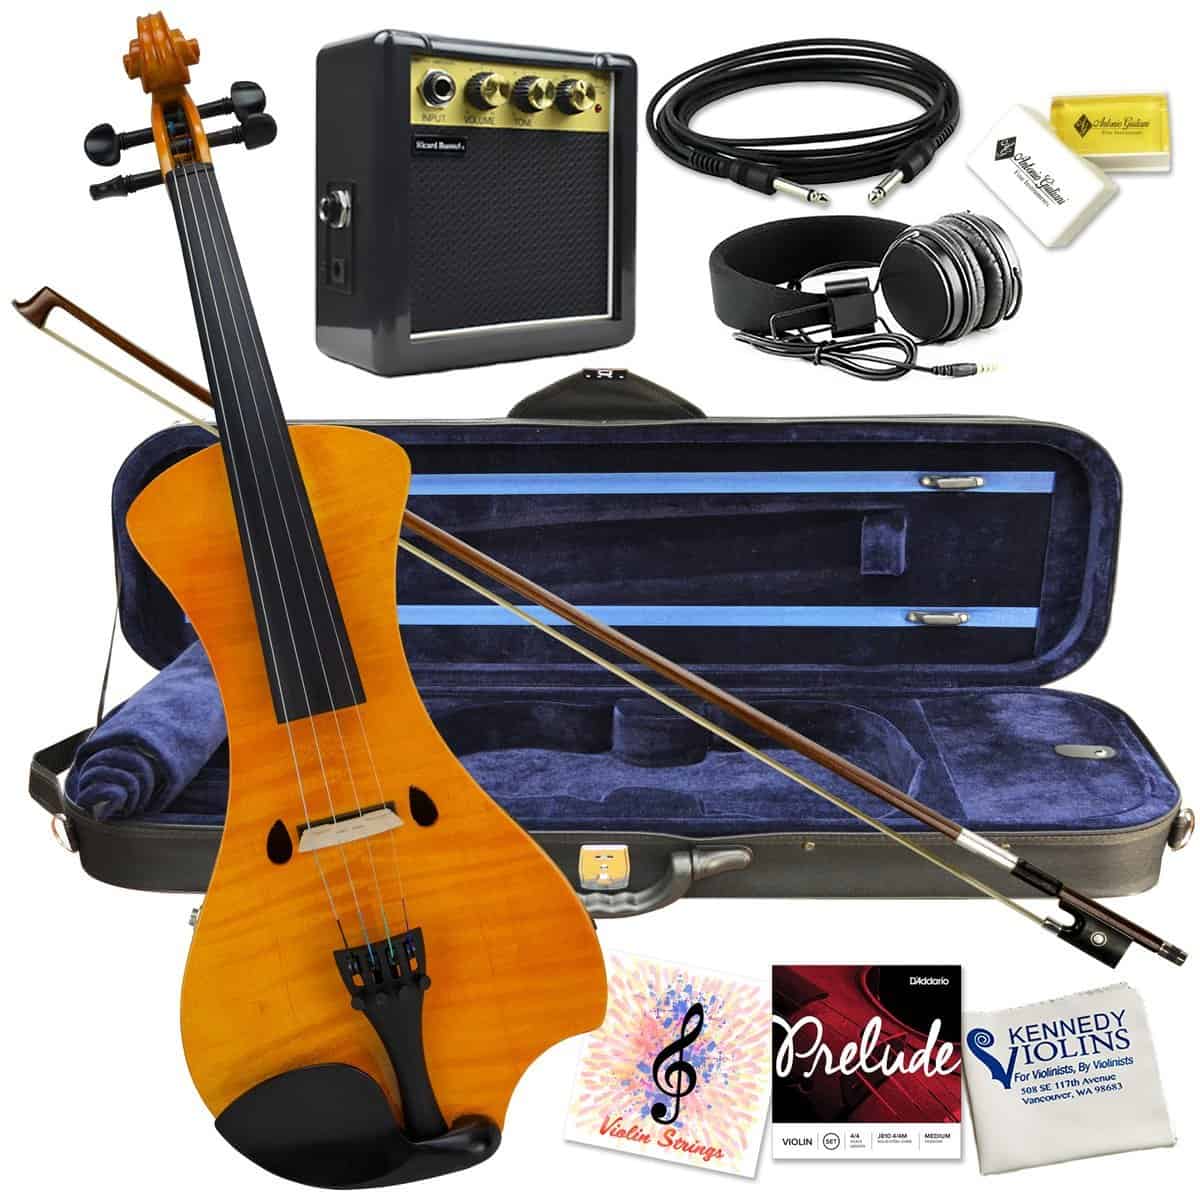 Bunnel EDGE Clearance Electric Violin Outfit Rock Star Red Amp Included BE300